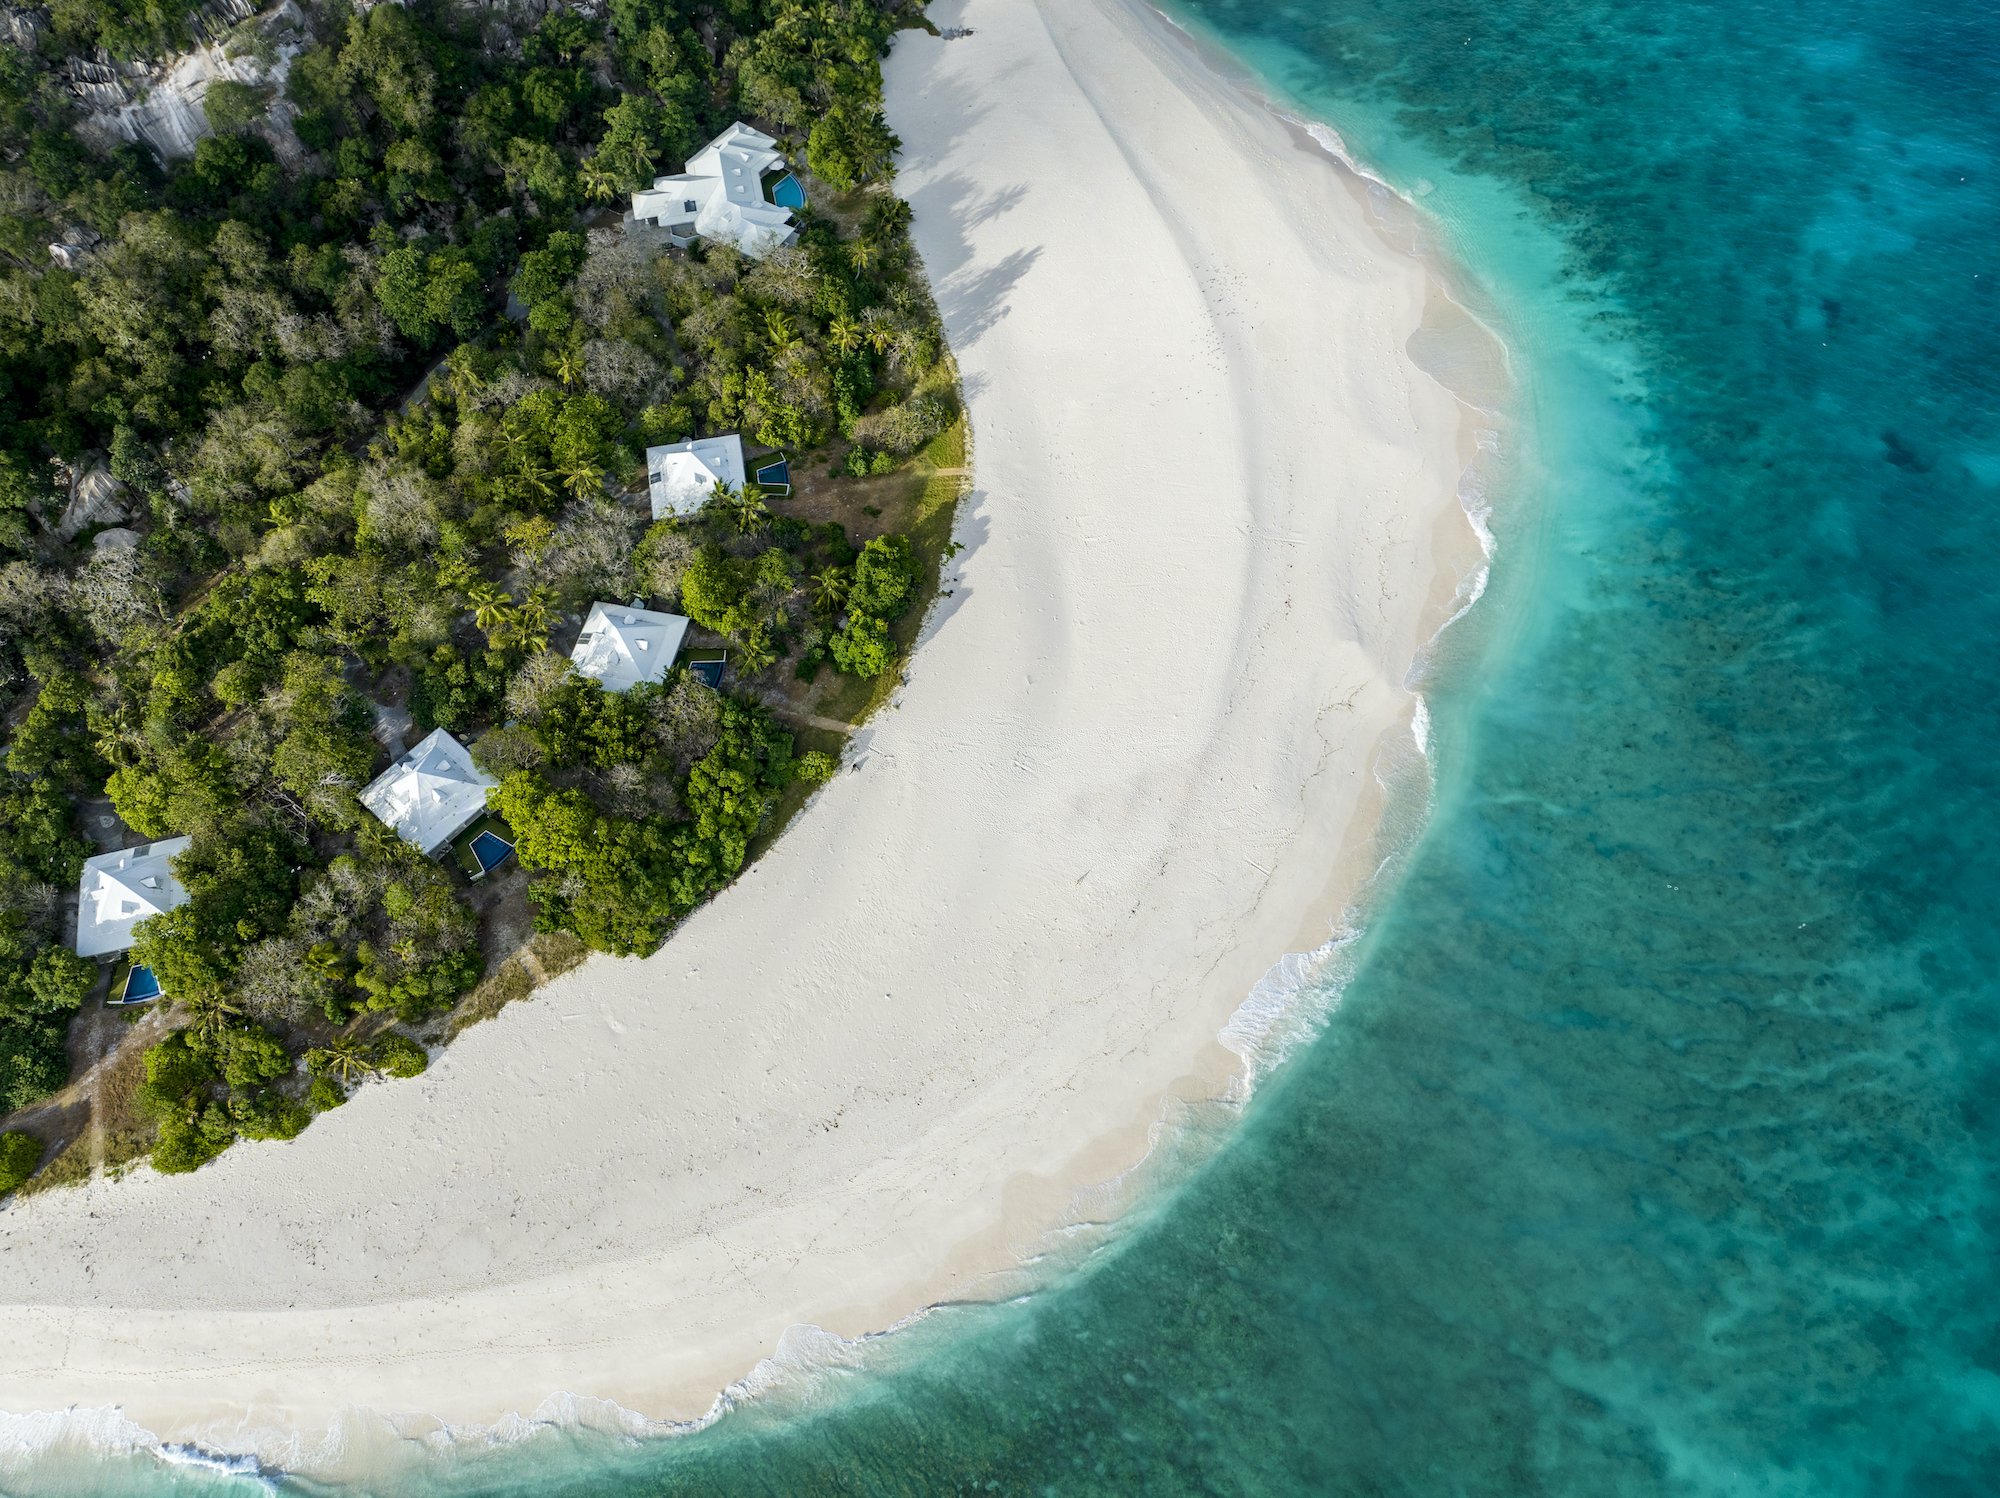 Balancing Luxury with Sustainability When Renting Your Own Private Island